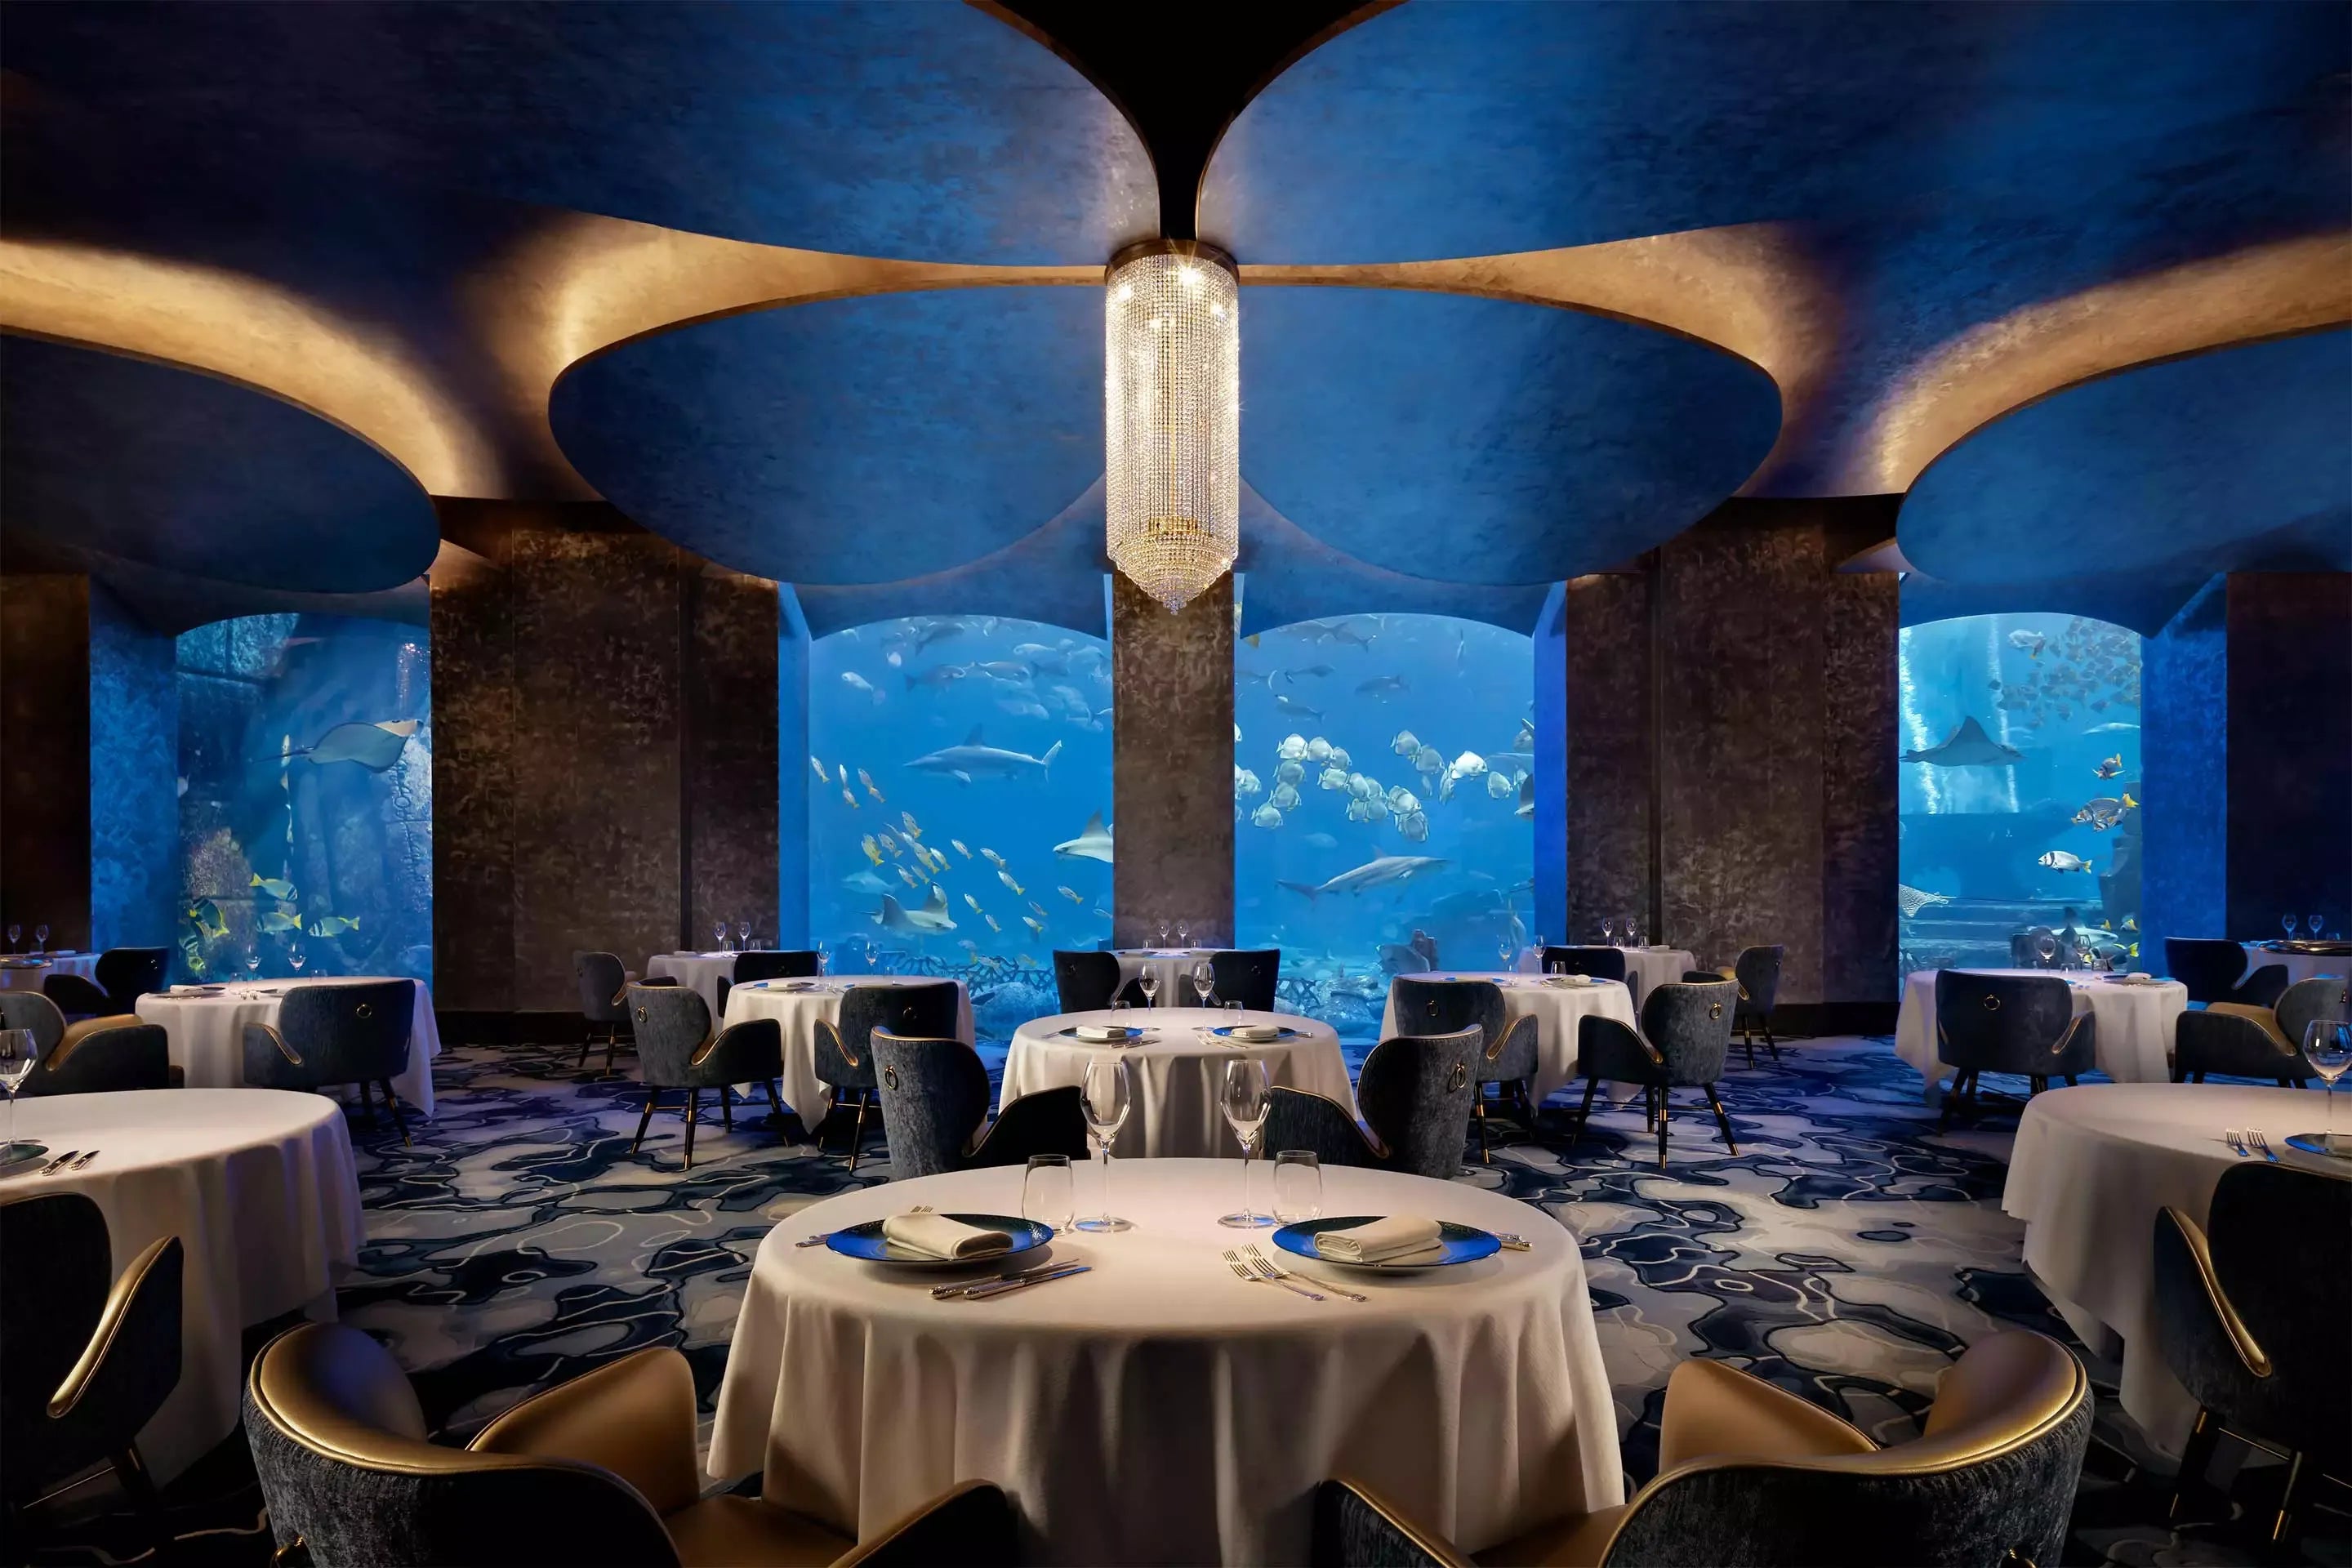 A Fancy Dinner Date at Atlantis the Royal